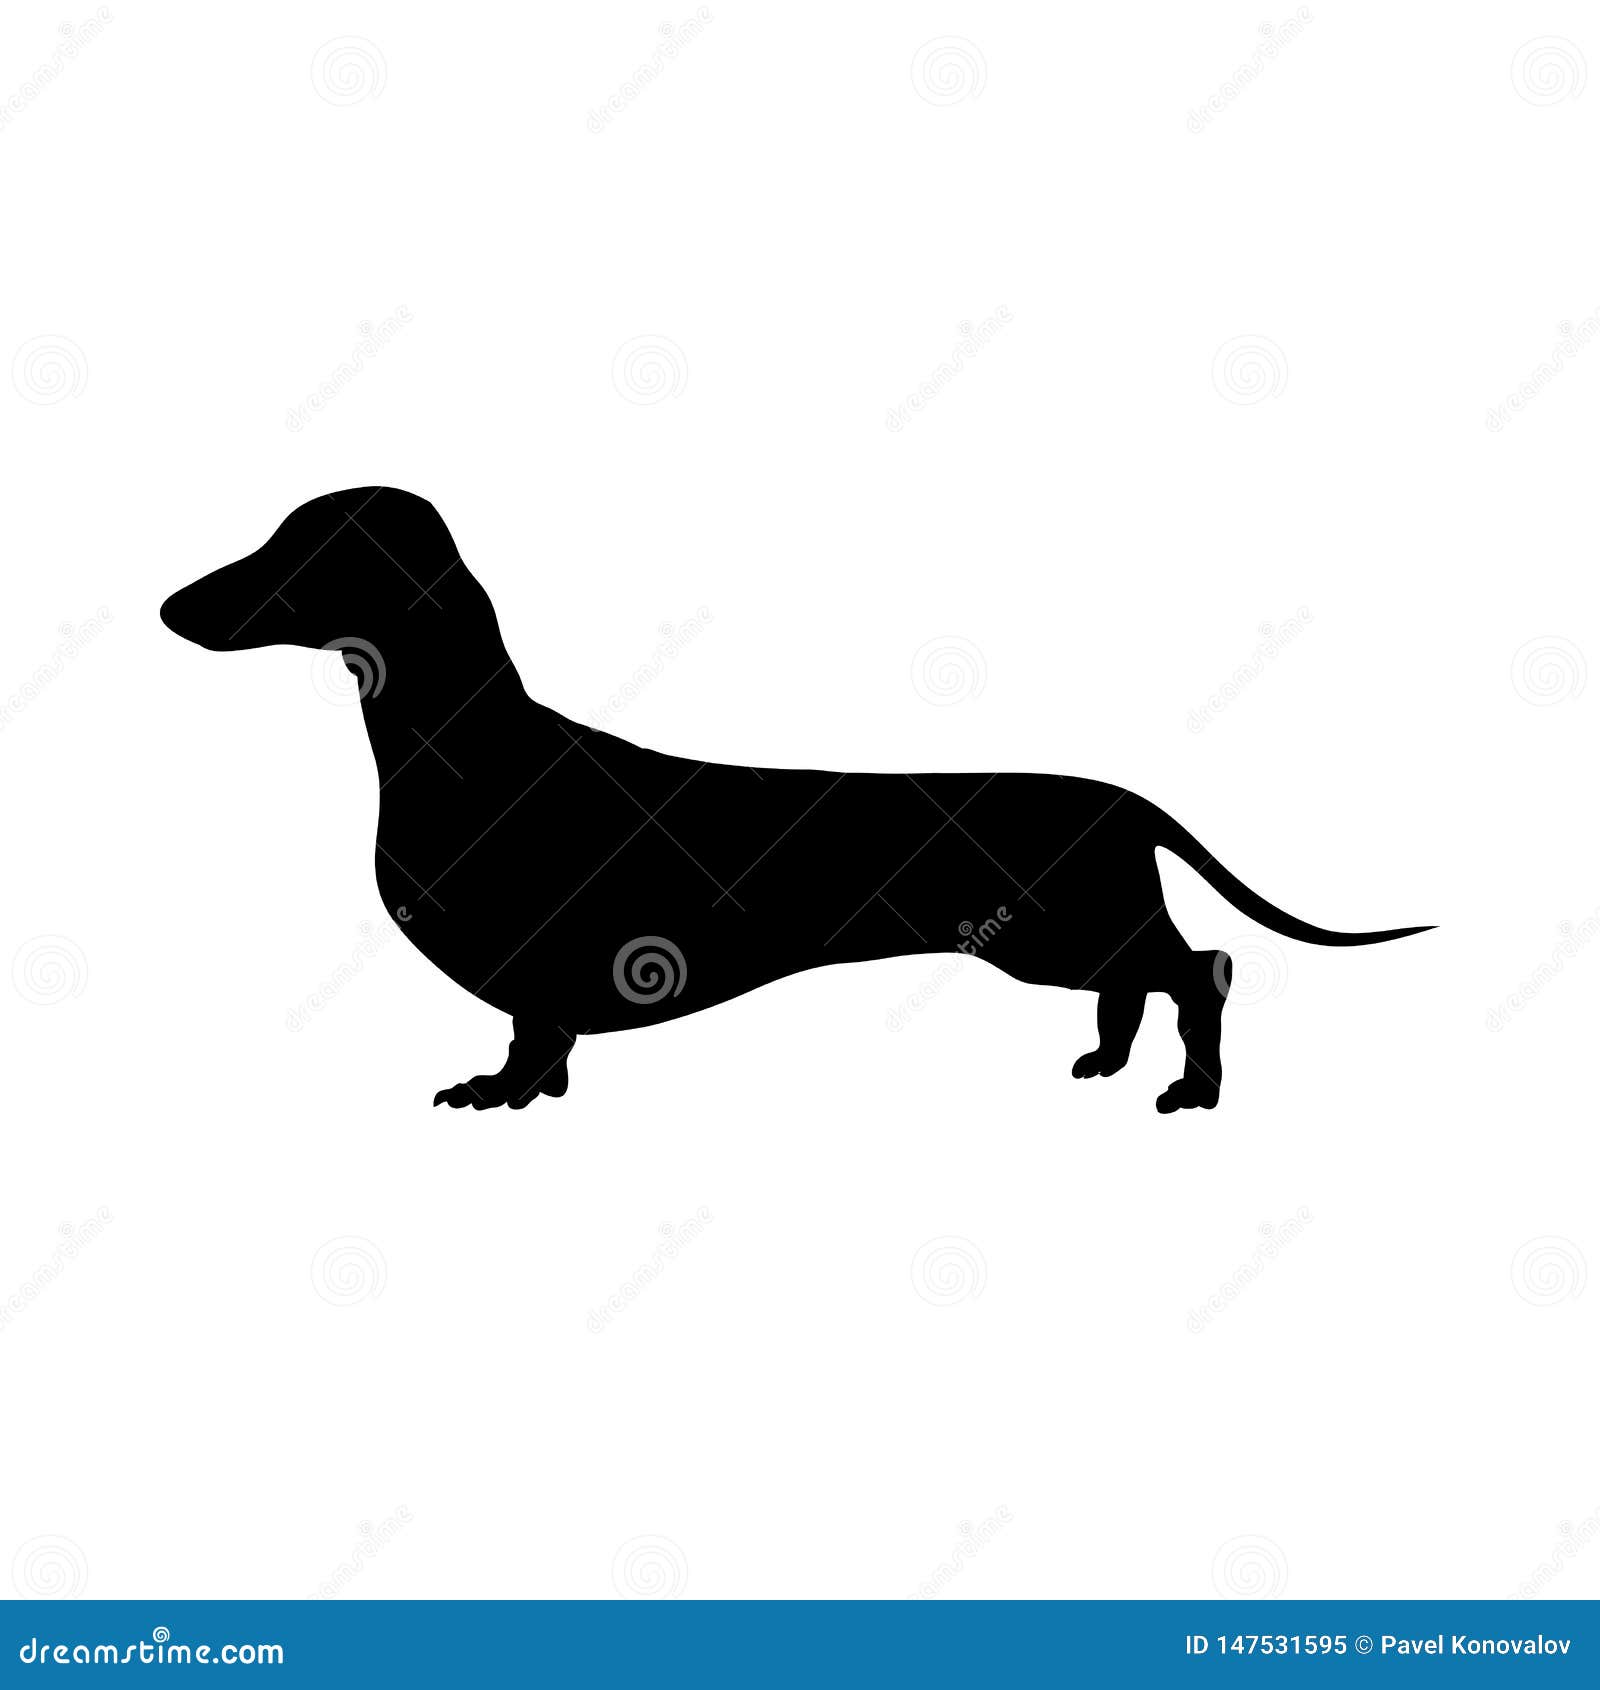 Download Dachshund Dog Silhouette stock vector. Illustration of ...